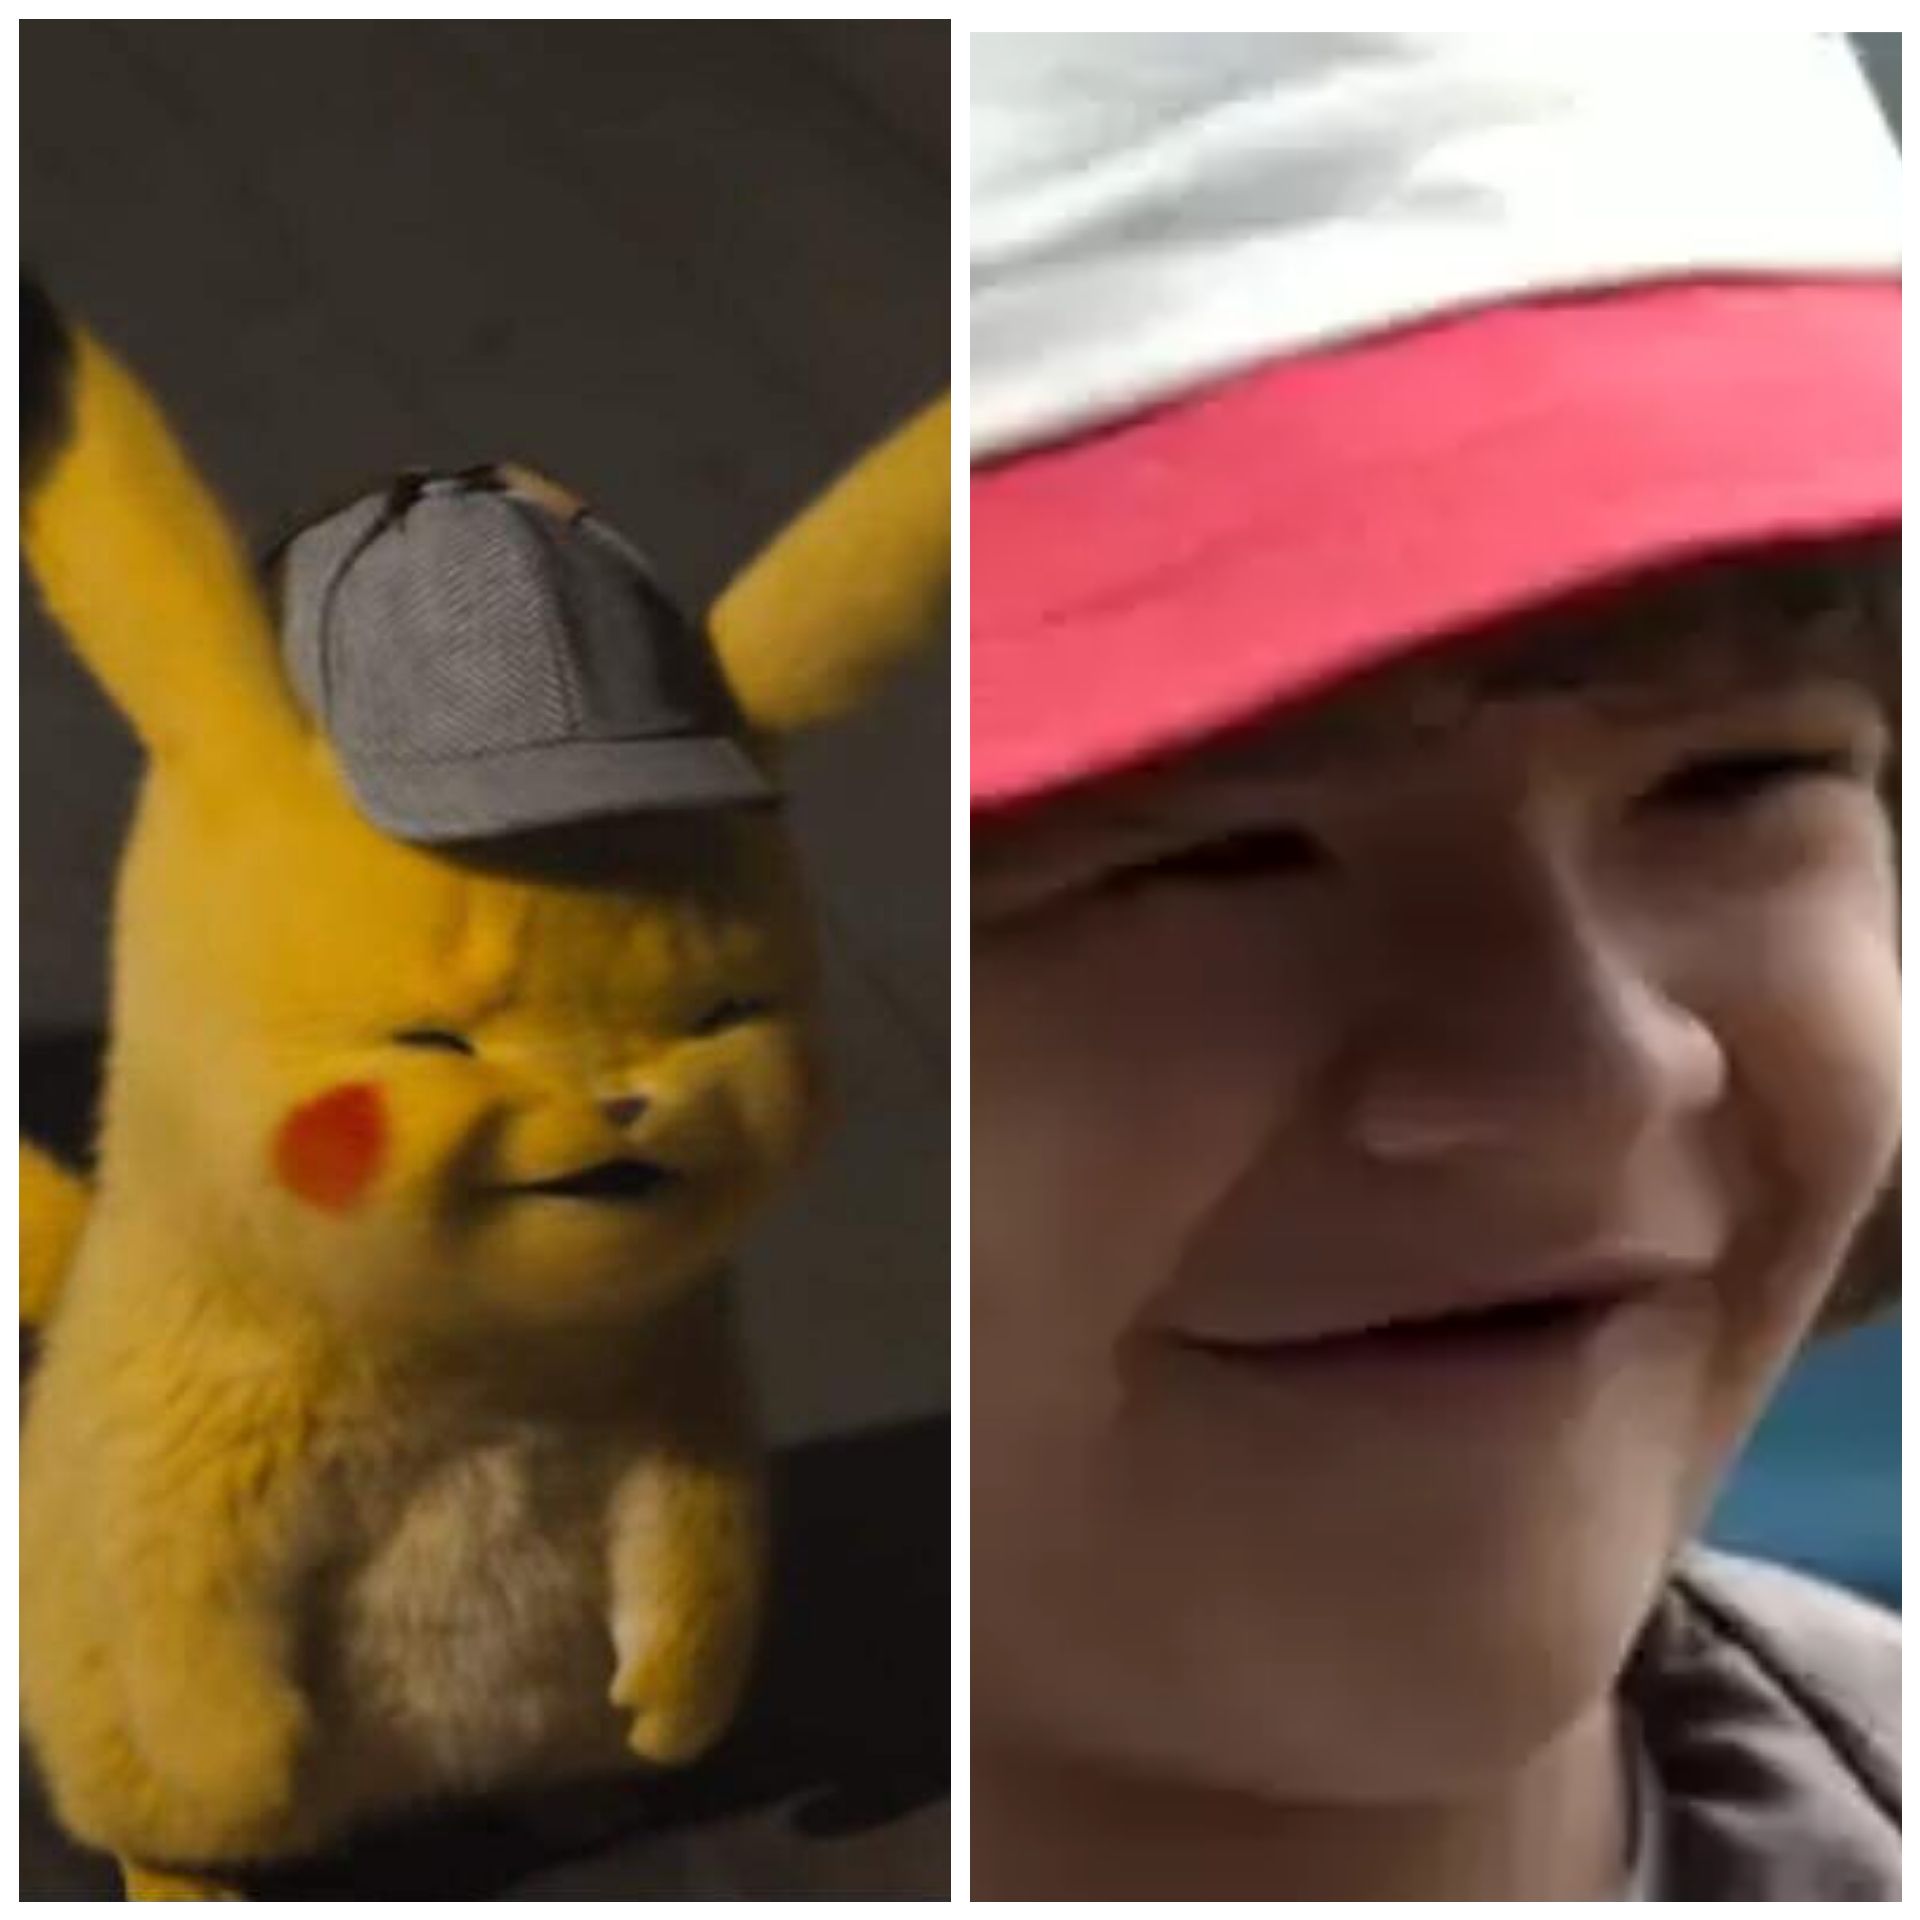 Detective Pikachu looks exactly like Dustin from Stranger Things